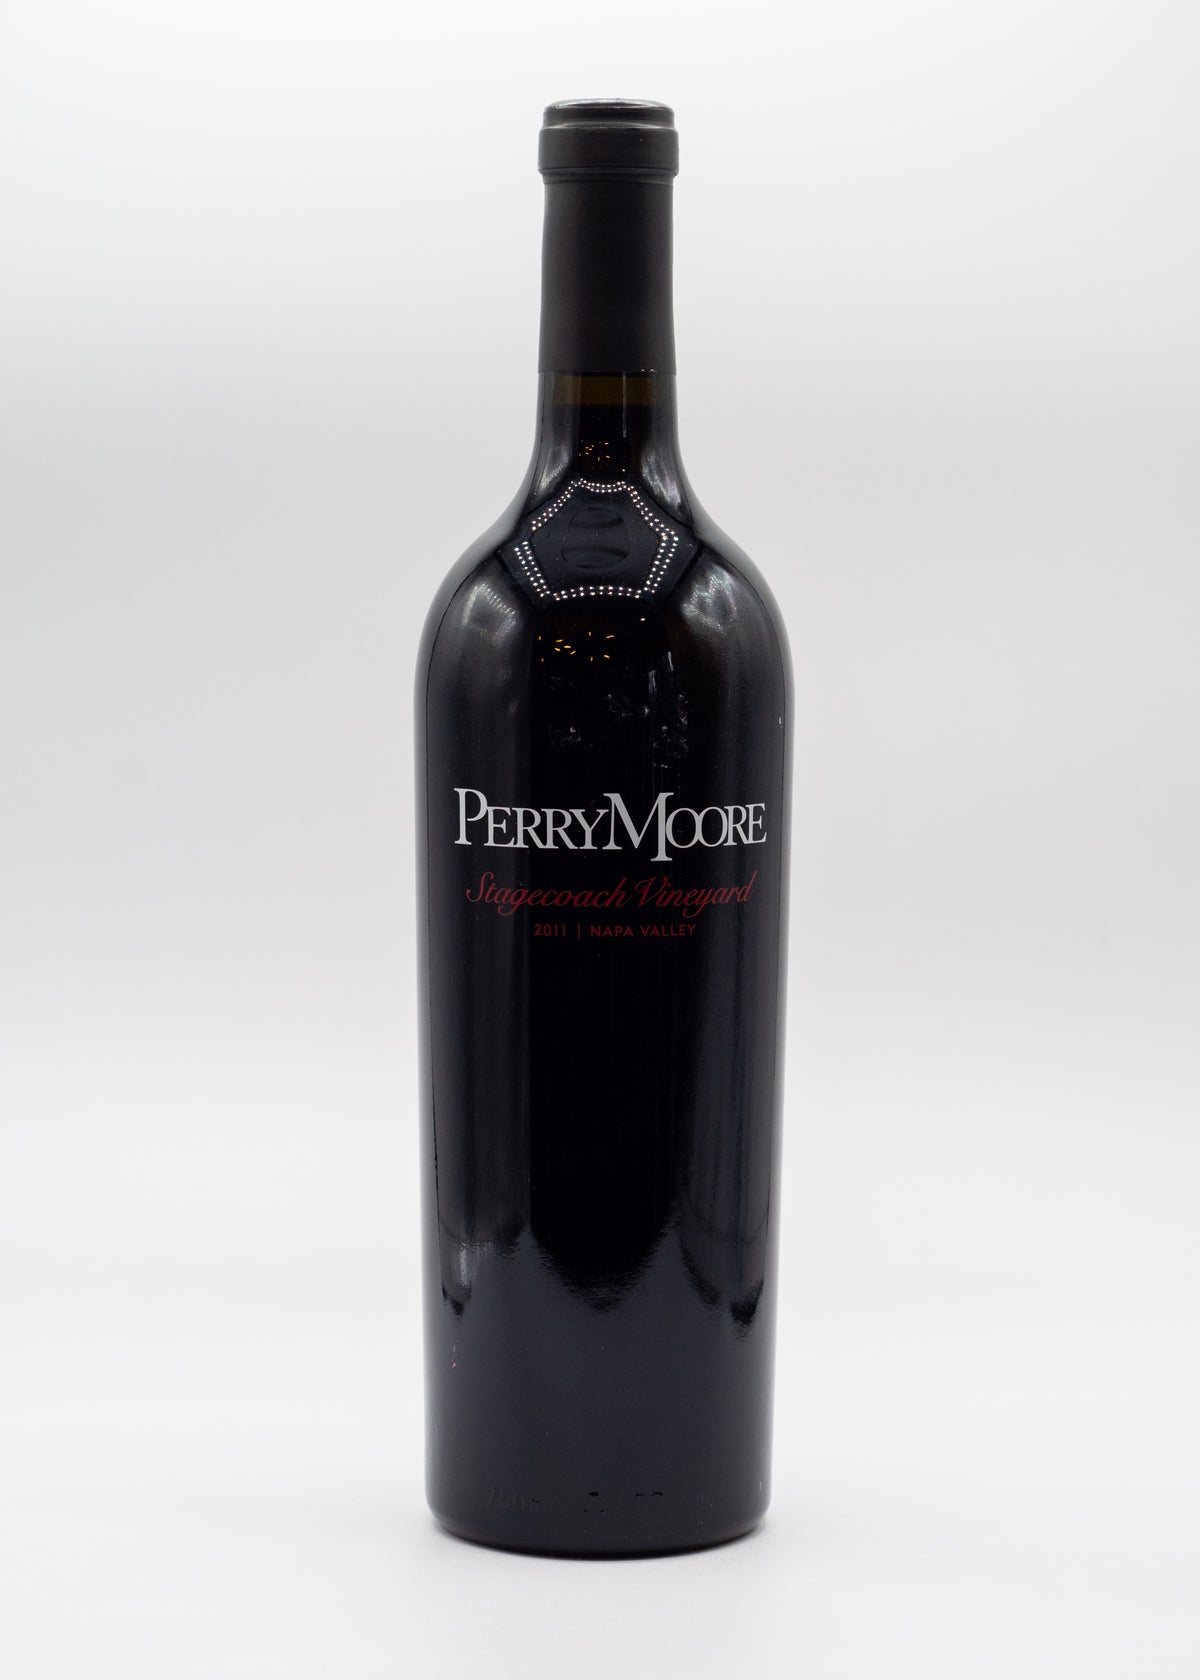 Perry Moore Cabernet Sauvignon Stagecoach Vineyard 2011